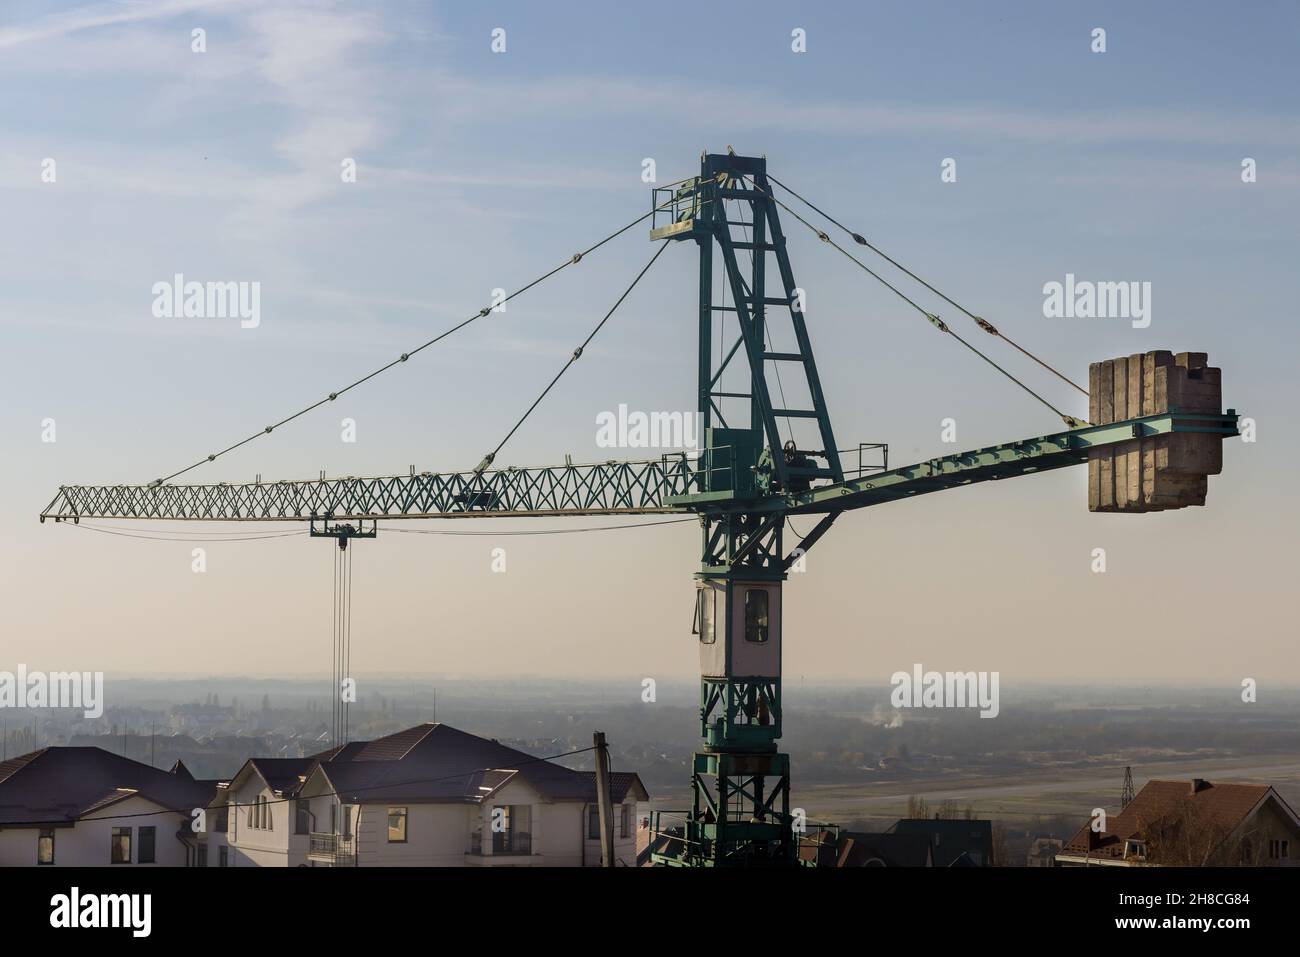 New high rise tenement building construction a multi-storey building with tower cranes Stock Photo